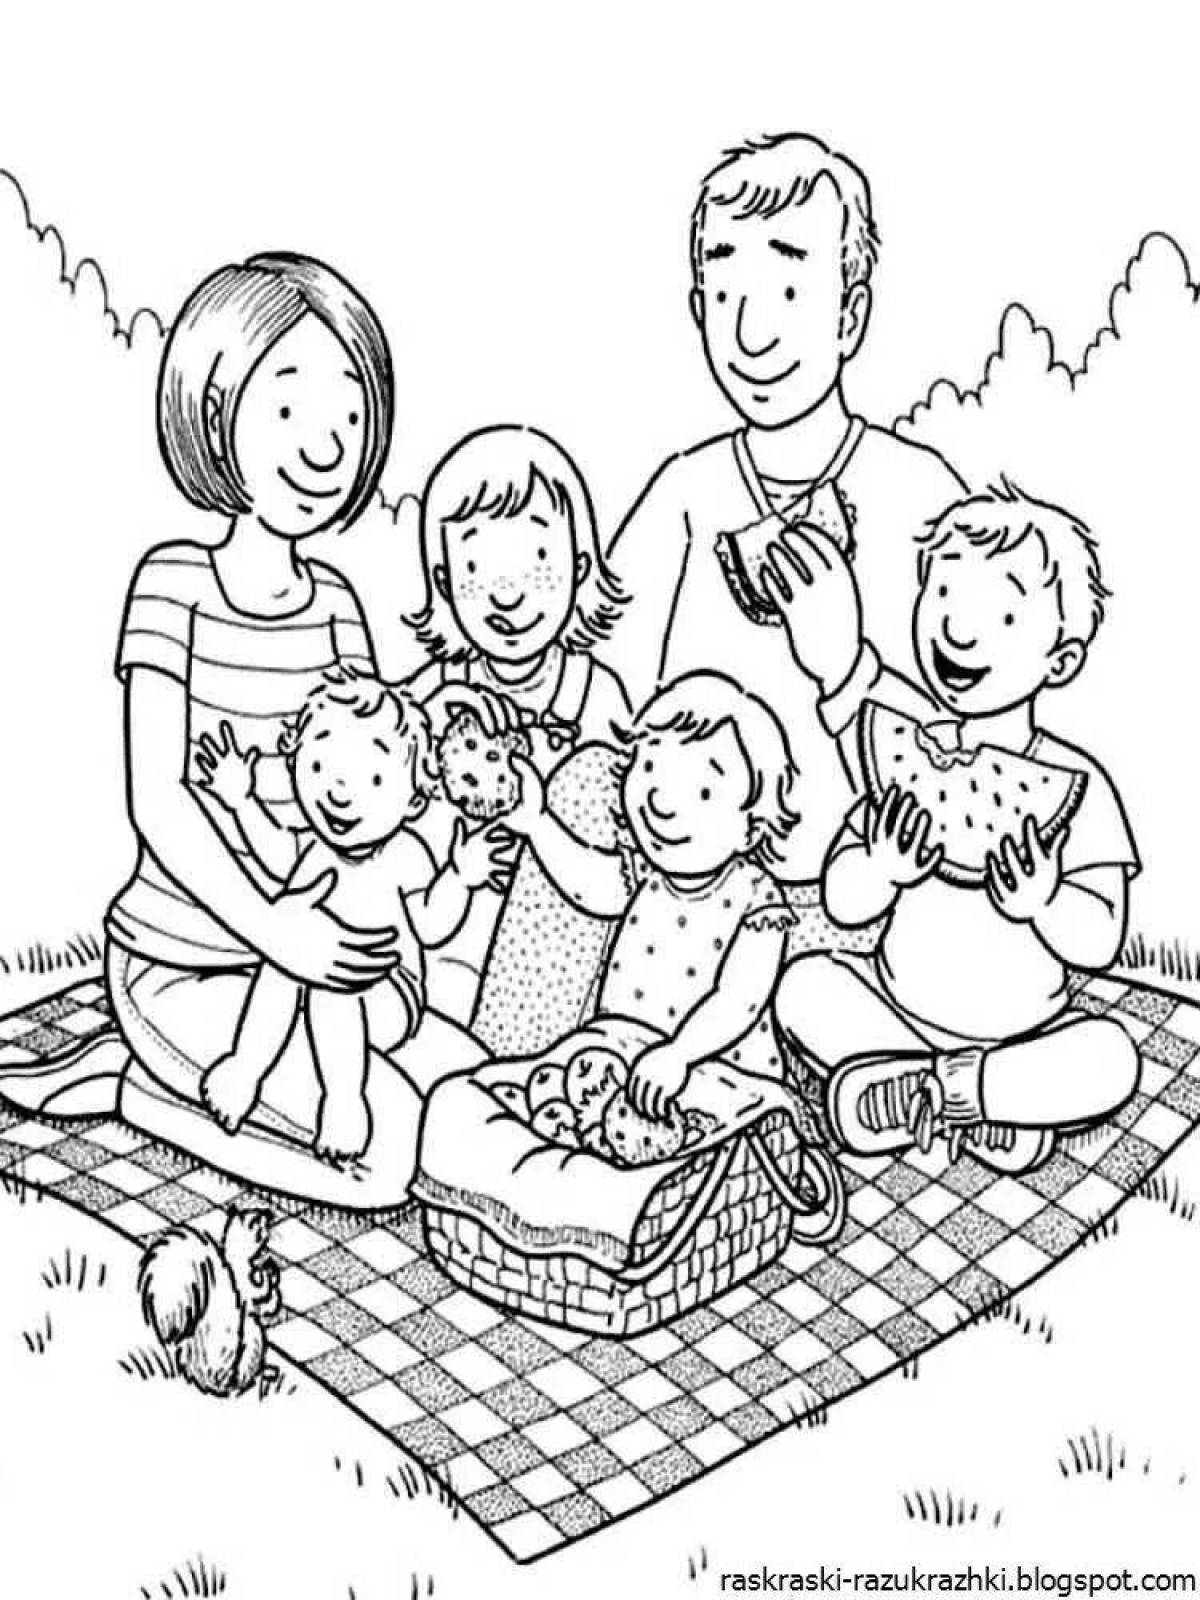 A fun family coloring book for 3-4 year olds